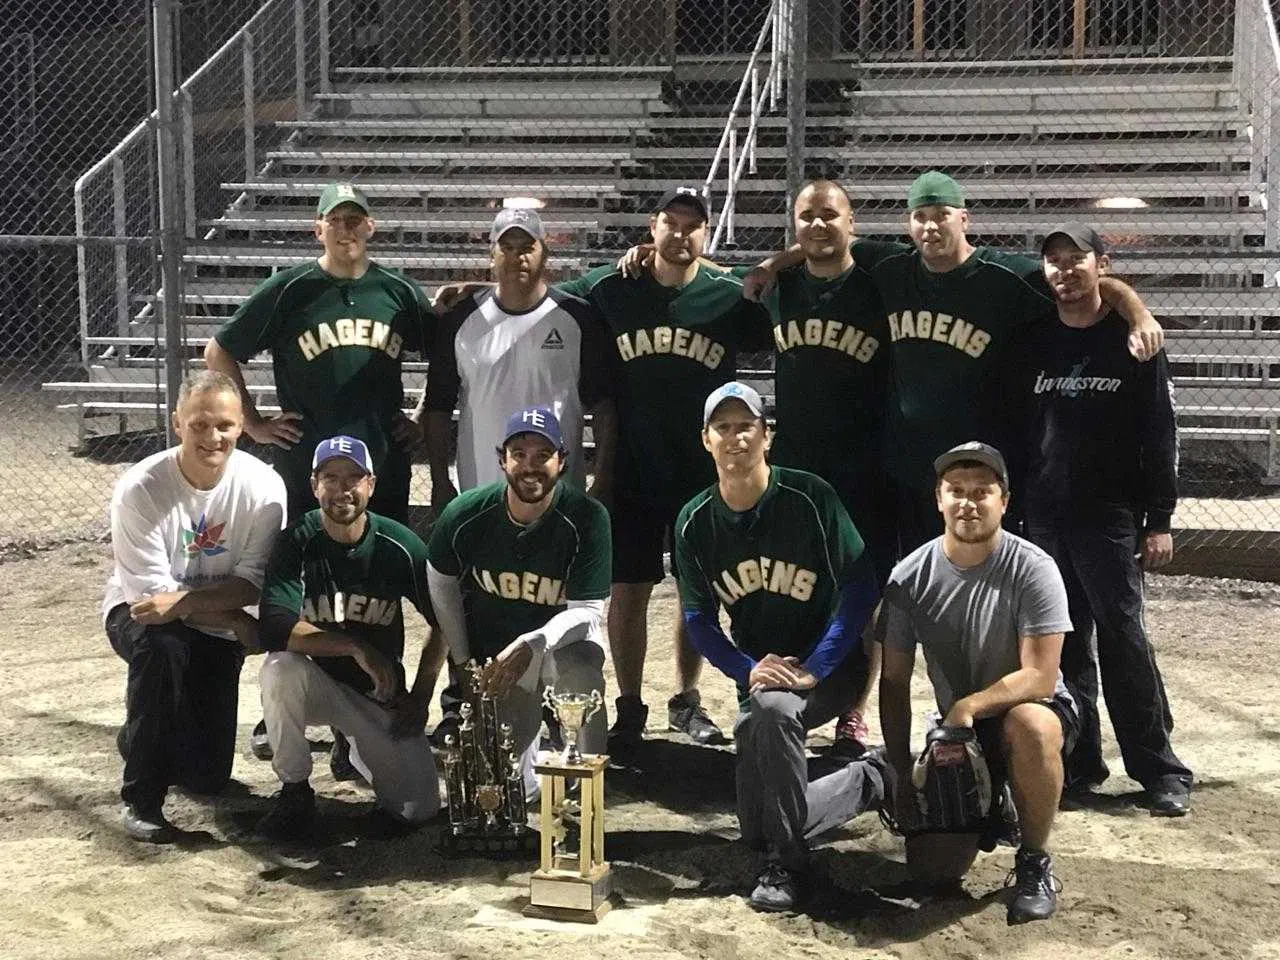 Hagens Heroes Slo-Pitch Champions